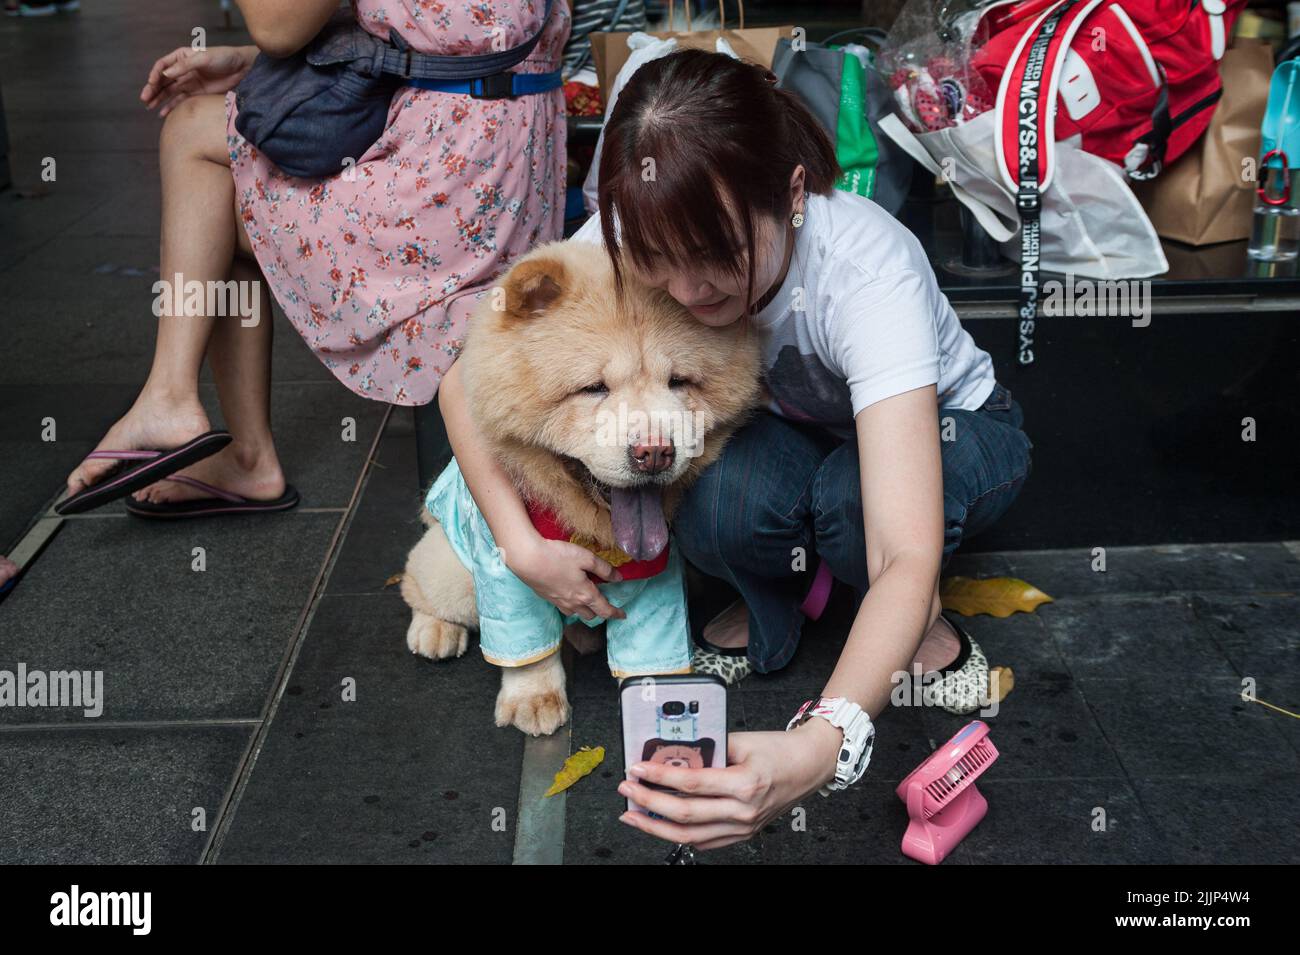 03.02.2018, Singapore, Republic of Singapore, Asia - Woman takes selfie together with her dog, a Chow Chow, at the Kreta Ayer Square in the Chinatown. Stock Photo